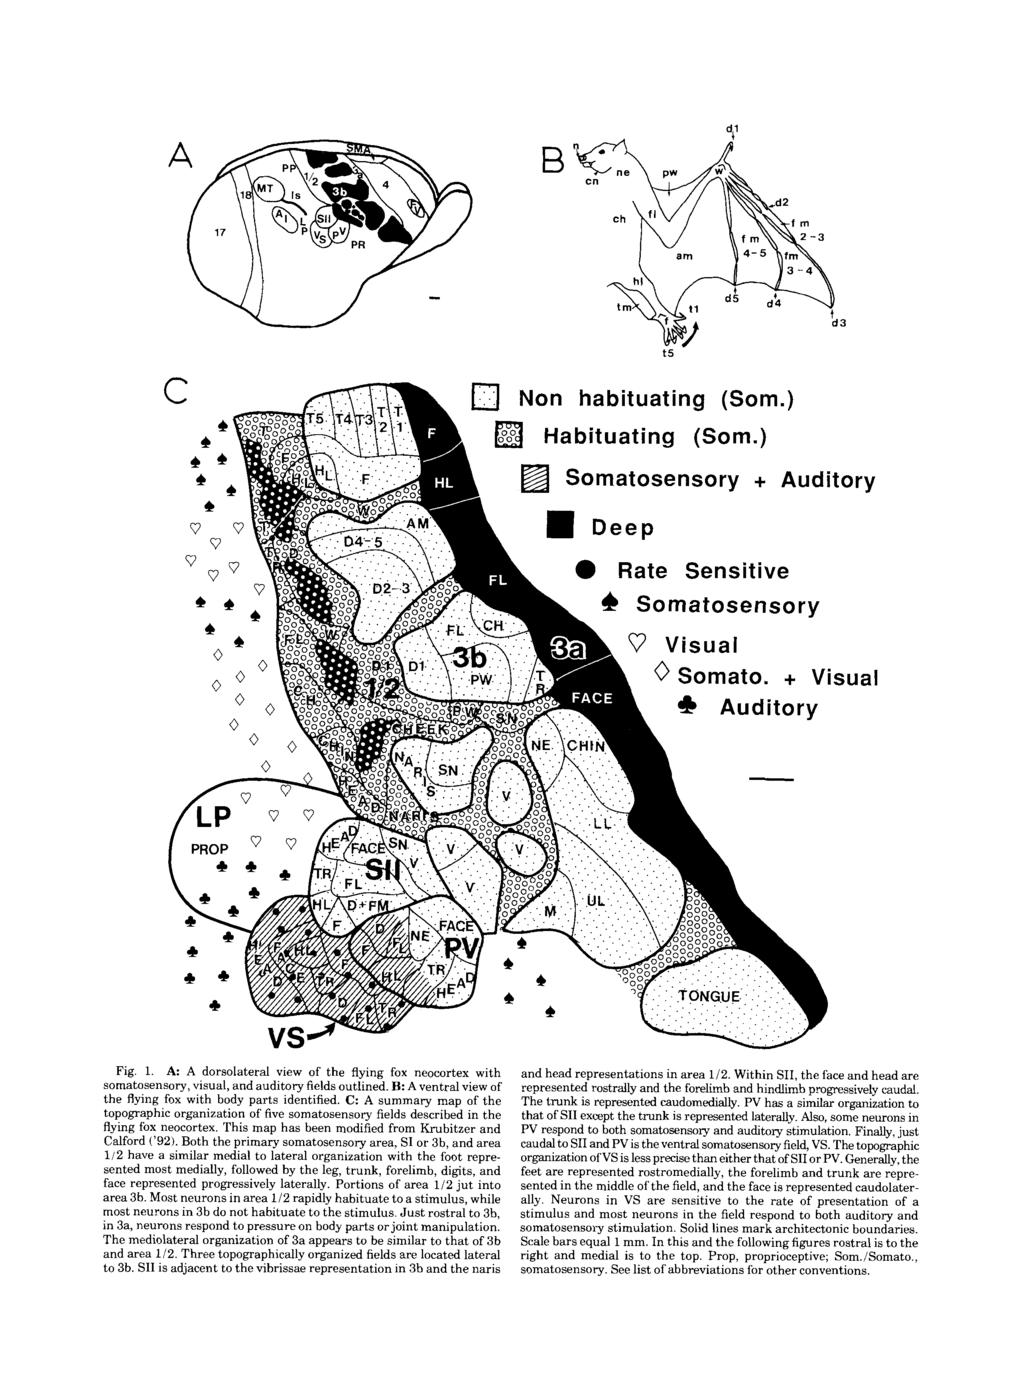 B cn t IV J am 14-5 4 b3 t5 Fig. 1. A: A dorsolateral view of the flying fox neocortex with somatosensory, visual, and auditory fields outlined.